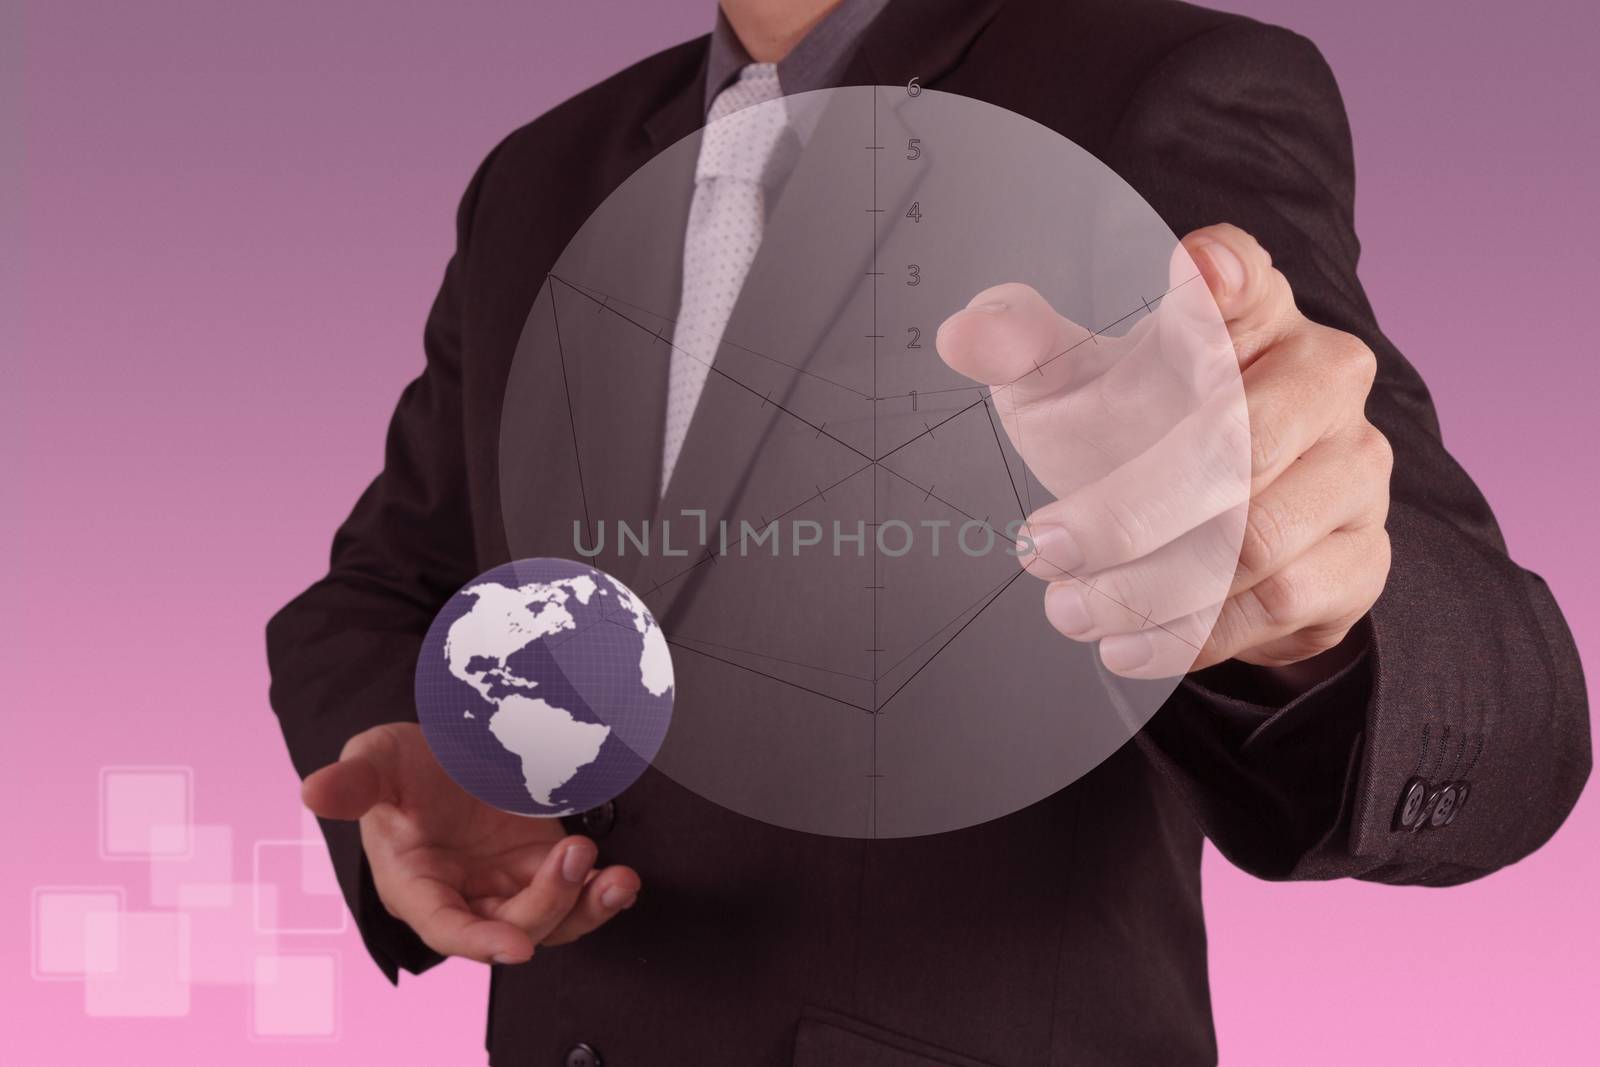 businessman hand drawing a pie chart and 3d graph